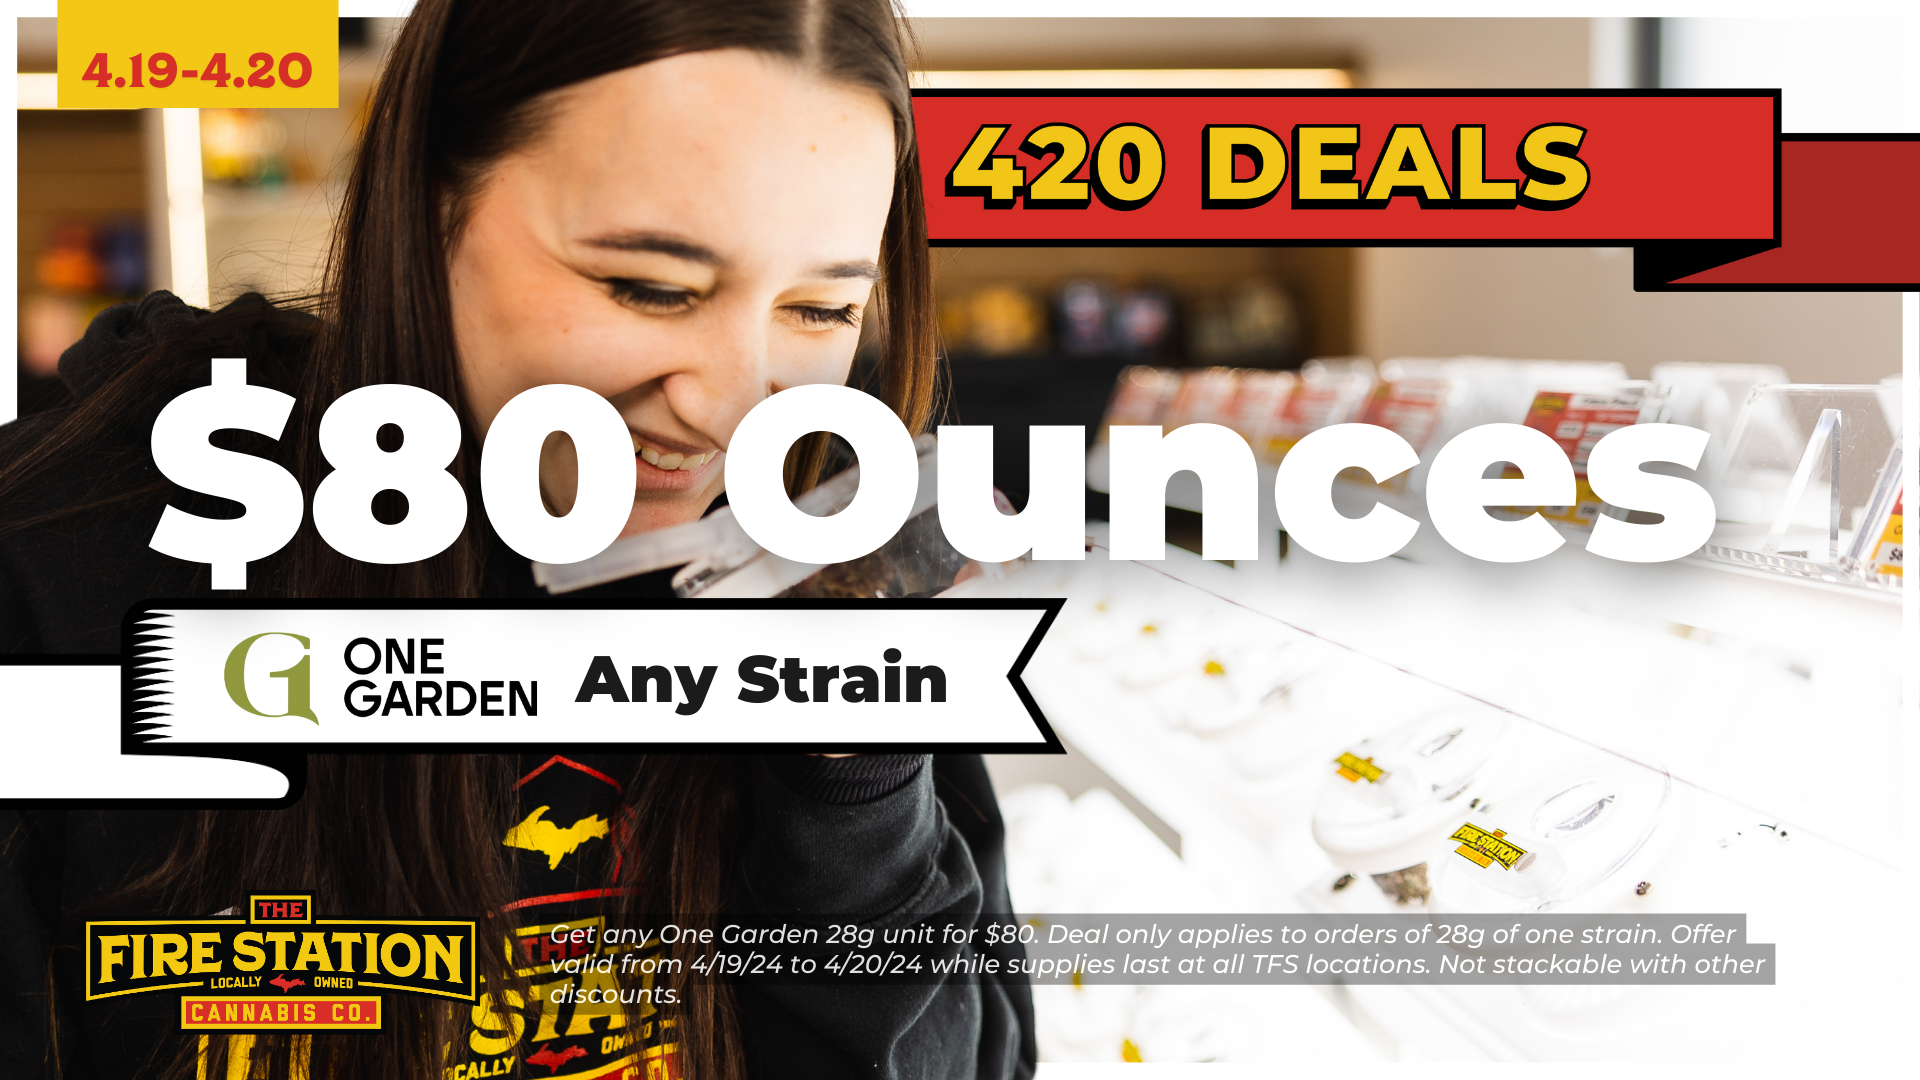 Get any One Garden 28g unit for $80. Deal only applies to orders of 28g of one strain. Offer valid from 4/19/24 to 4/20/24 while supplies last at all TFS locations. Not stackable with other discounts.